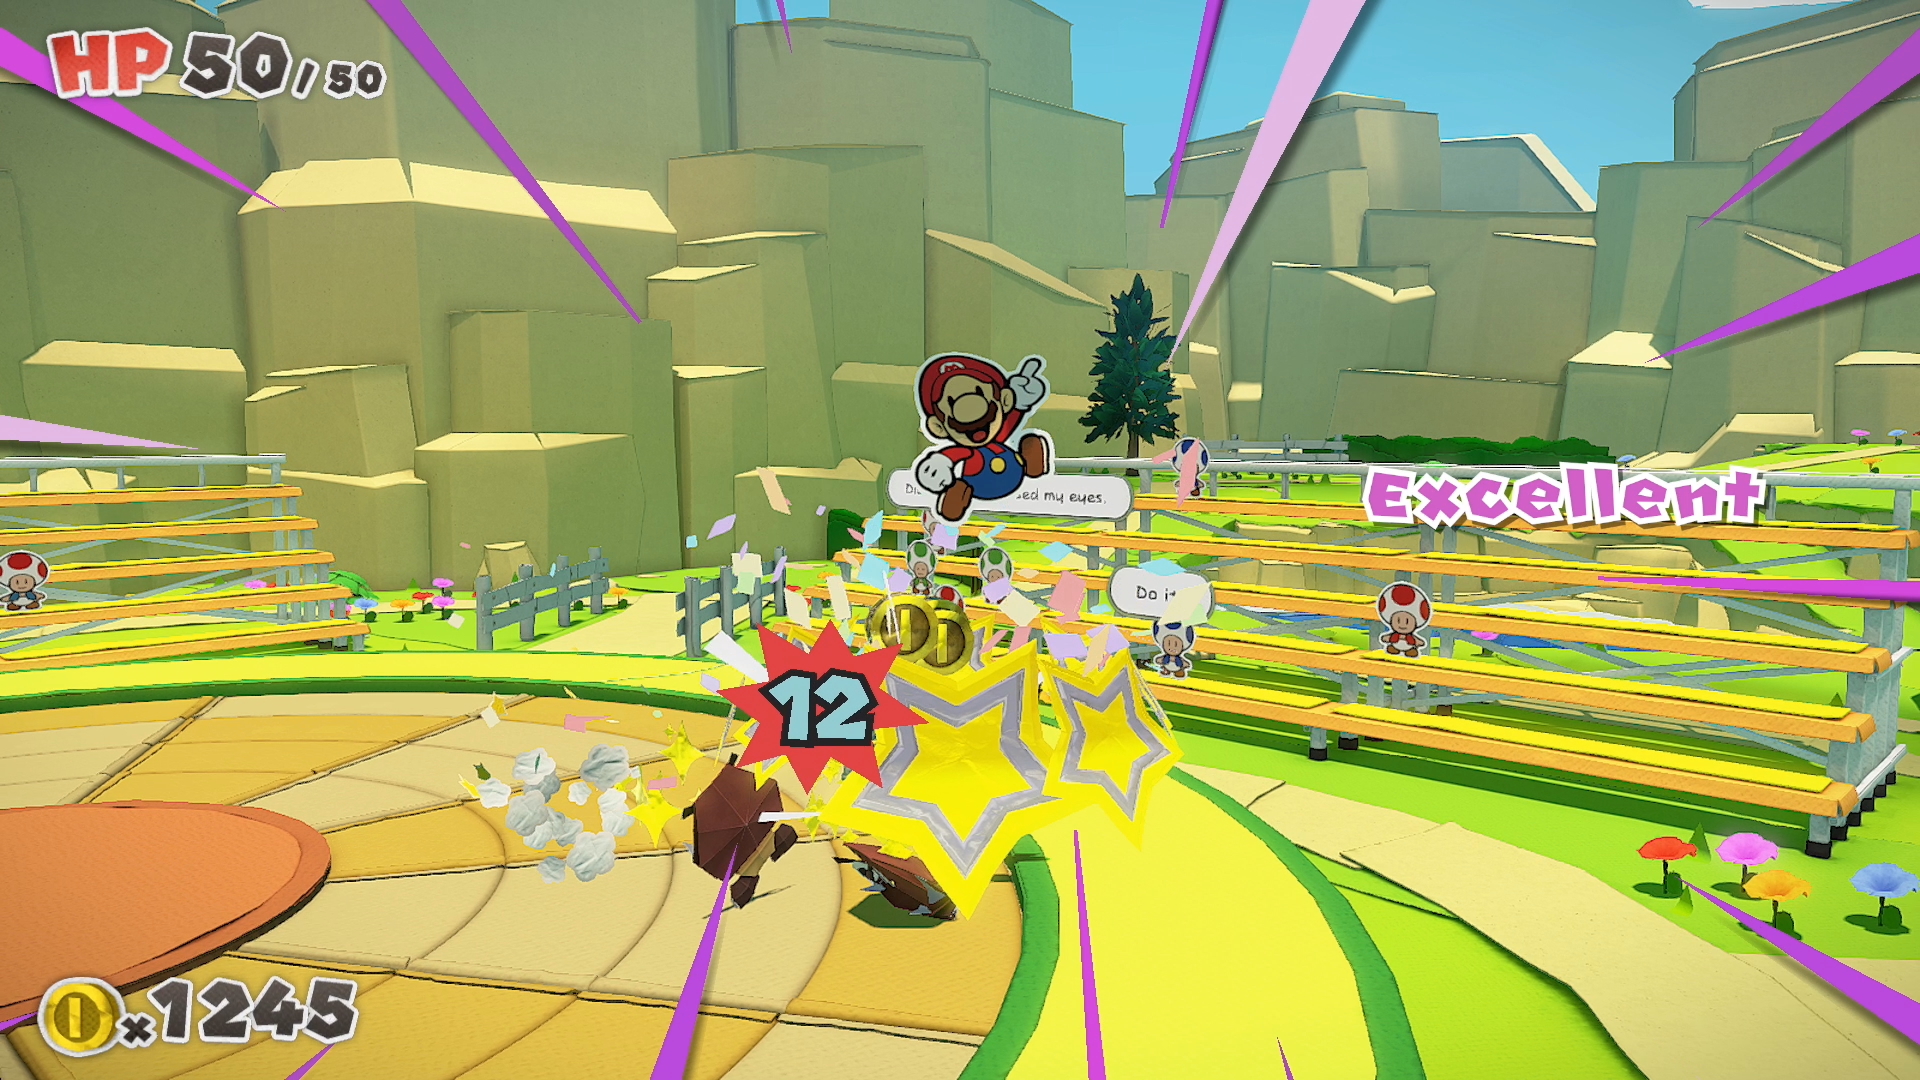 A screenshot from Paper Mario: The Origami King's battle system